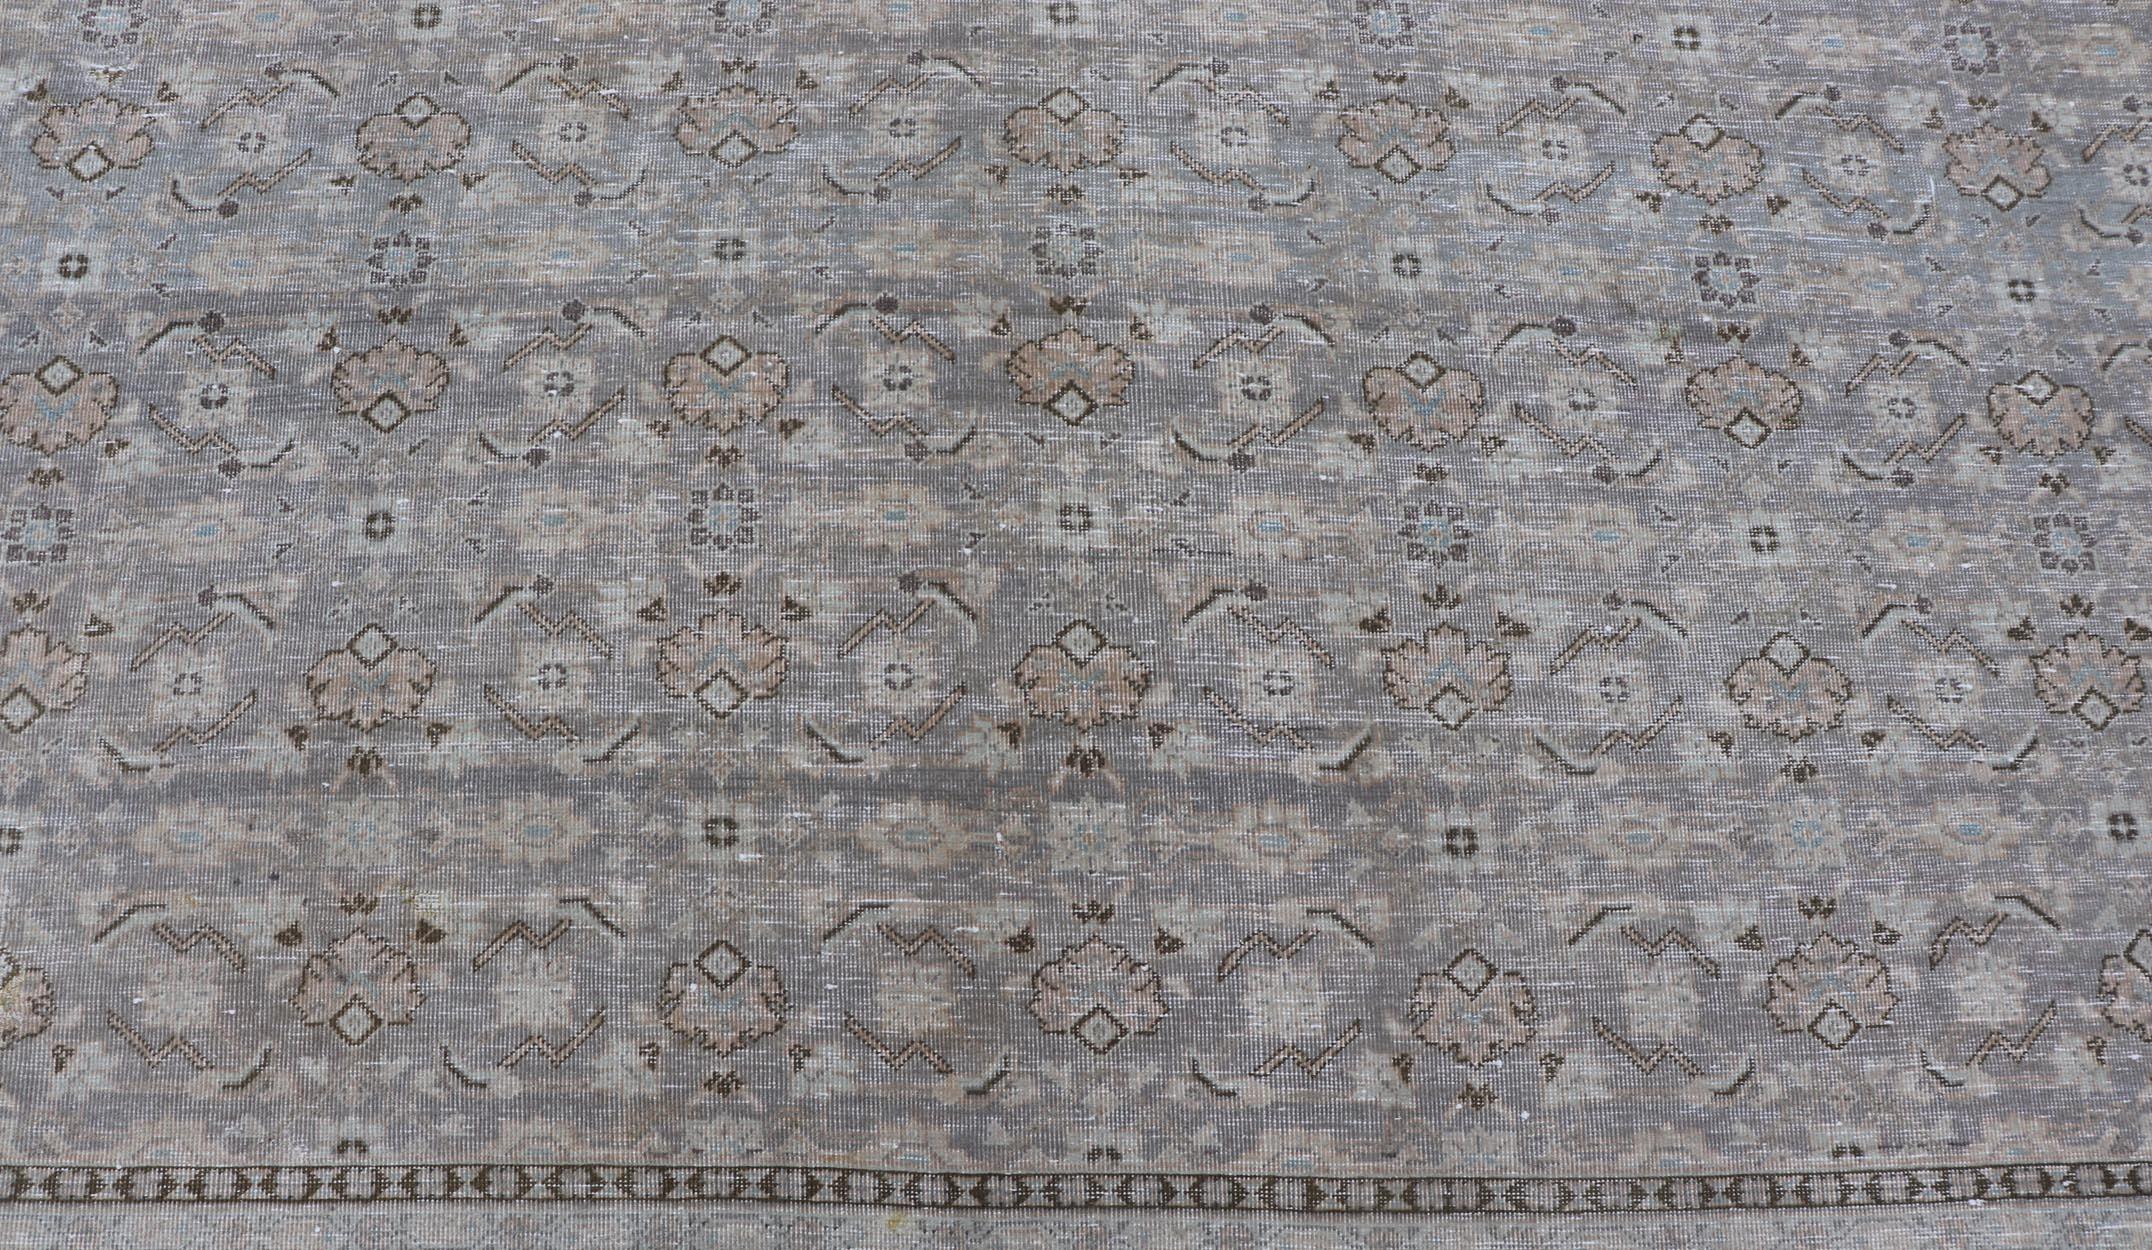 Antique Persian Tabriz Rug in All-Over Herati in Shades of Lavender and Tan  In Good Condition For Sale In Atlanta, GA